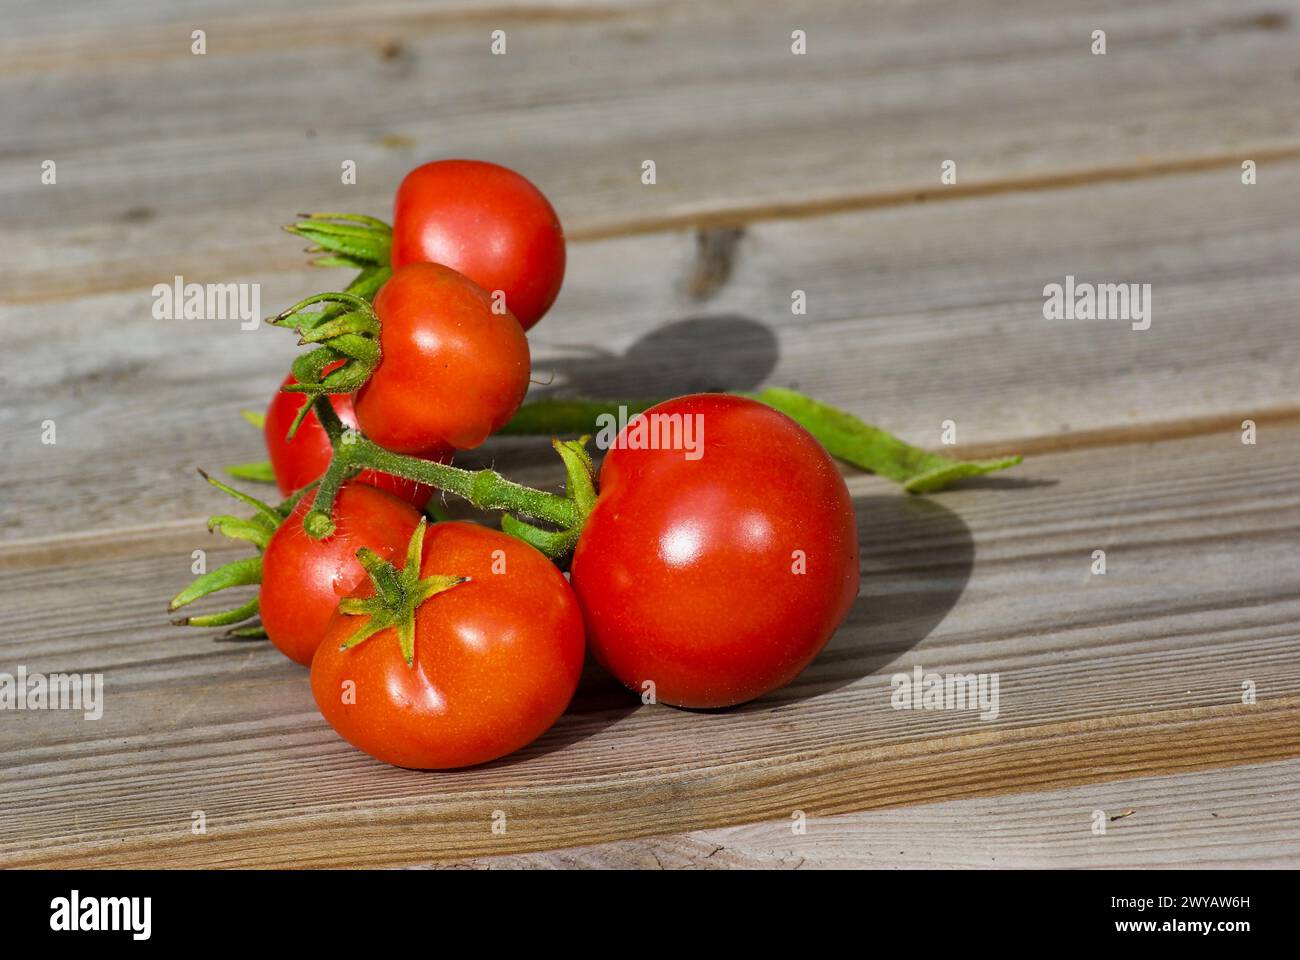 Cluster of ripe red organic cultivated tomatoes laying on wooden outdoor table in autumn. Stock Photo